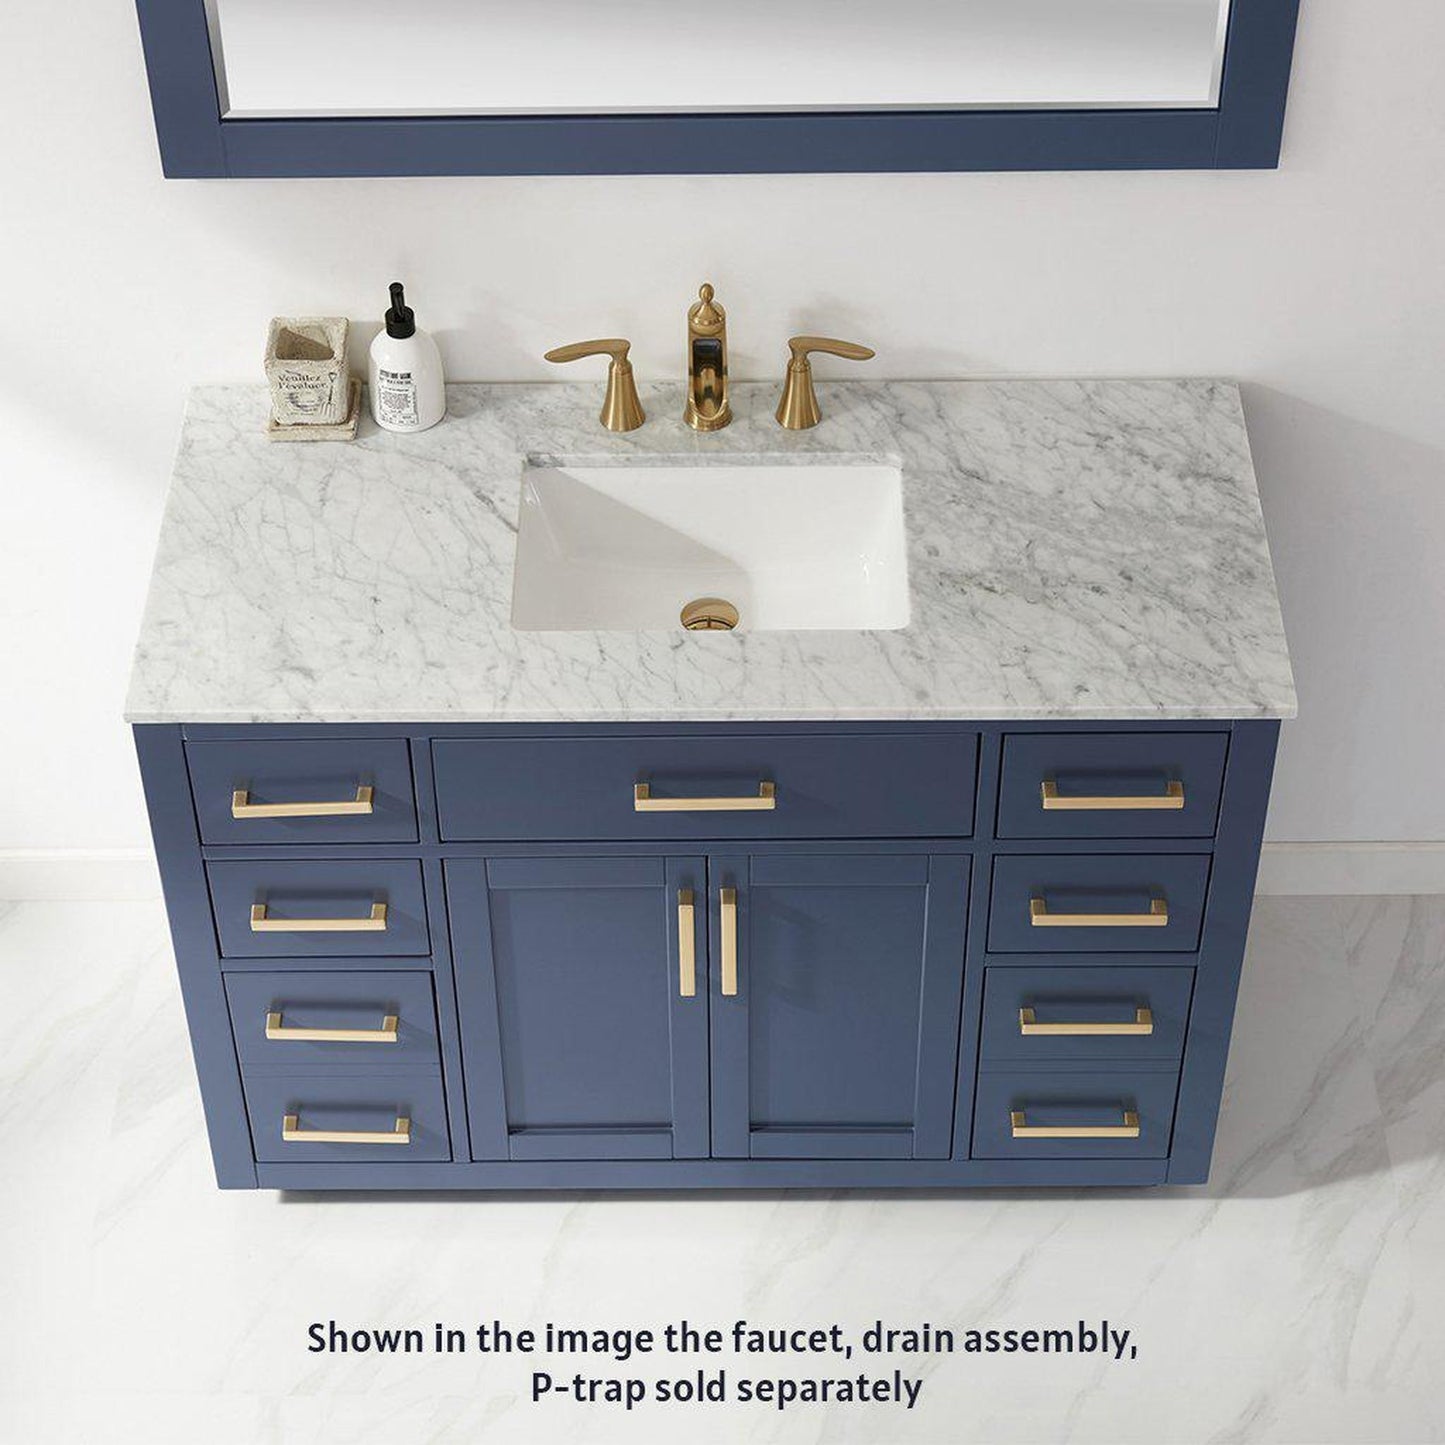 Altair Ivy 48" Single Royal Blue Freestanding Bathroom Vanity Set With Mirror, Natural Carrara White Marble Top, Rectangular Undermount Ceramic Sink, and Overflow